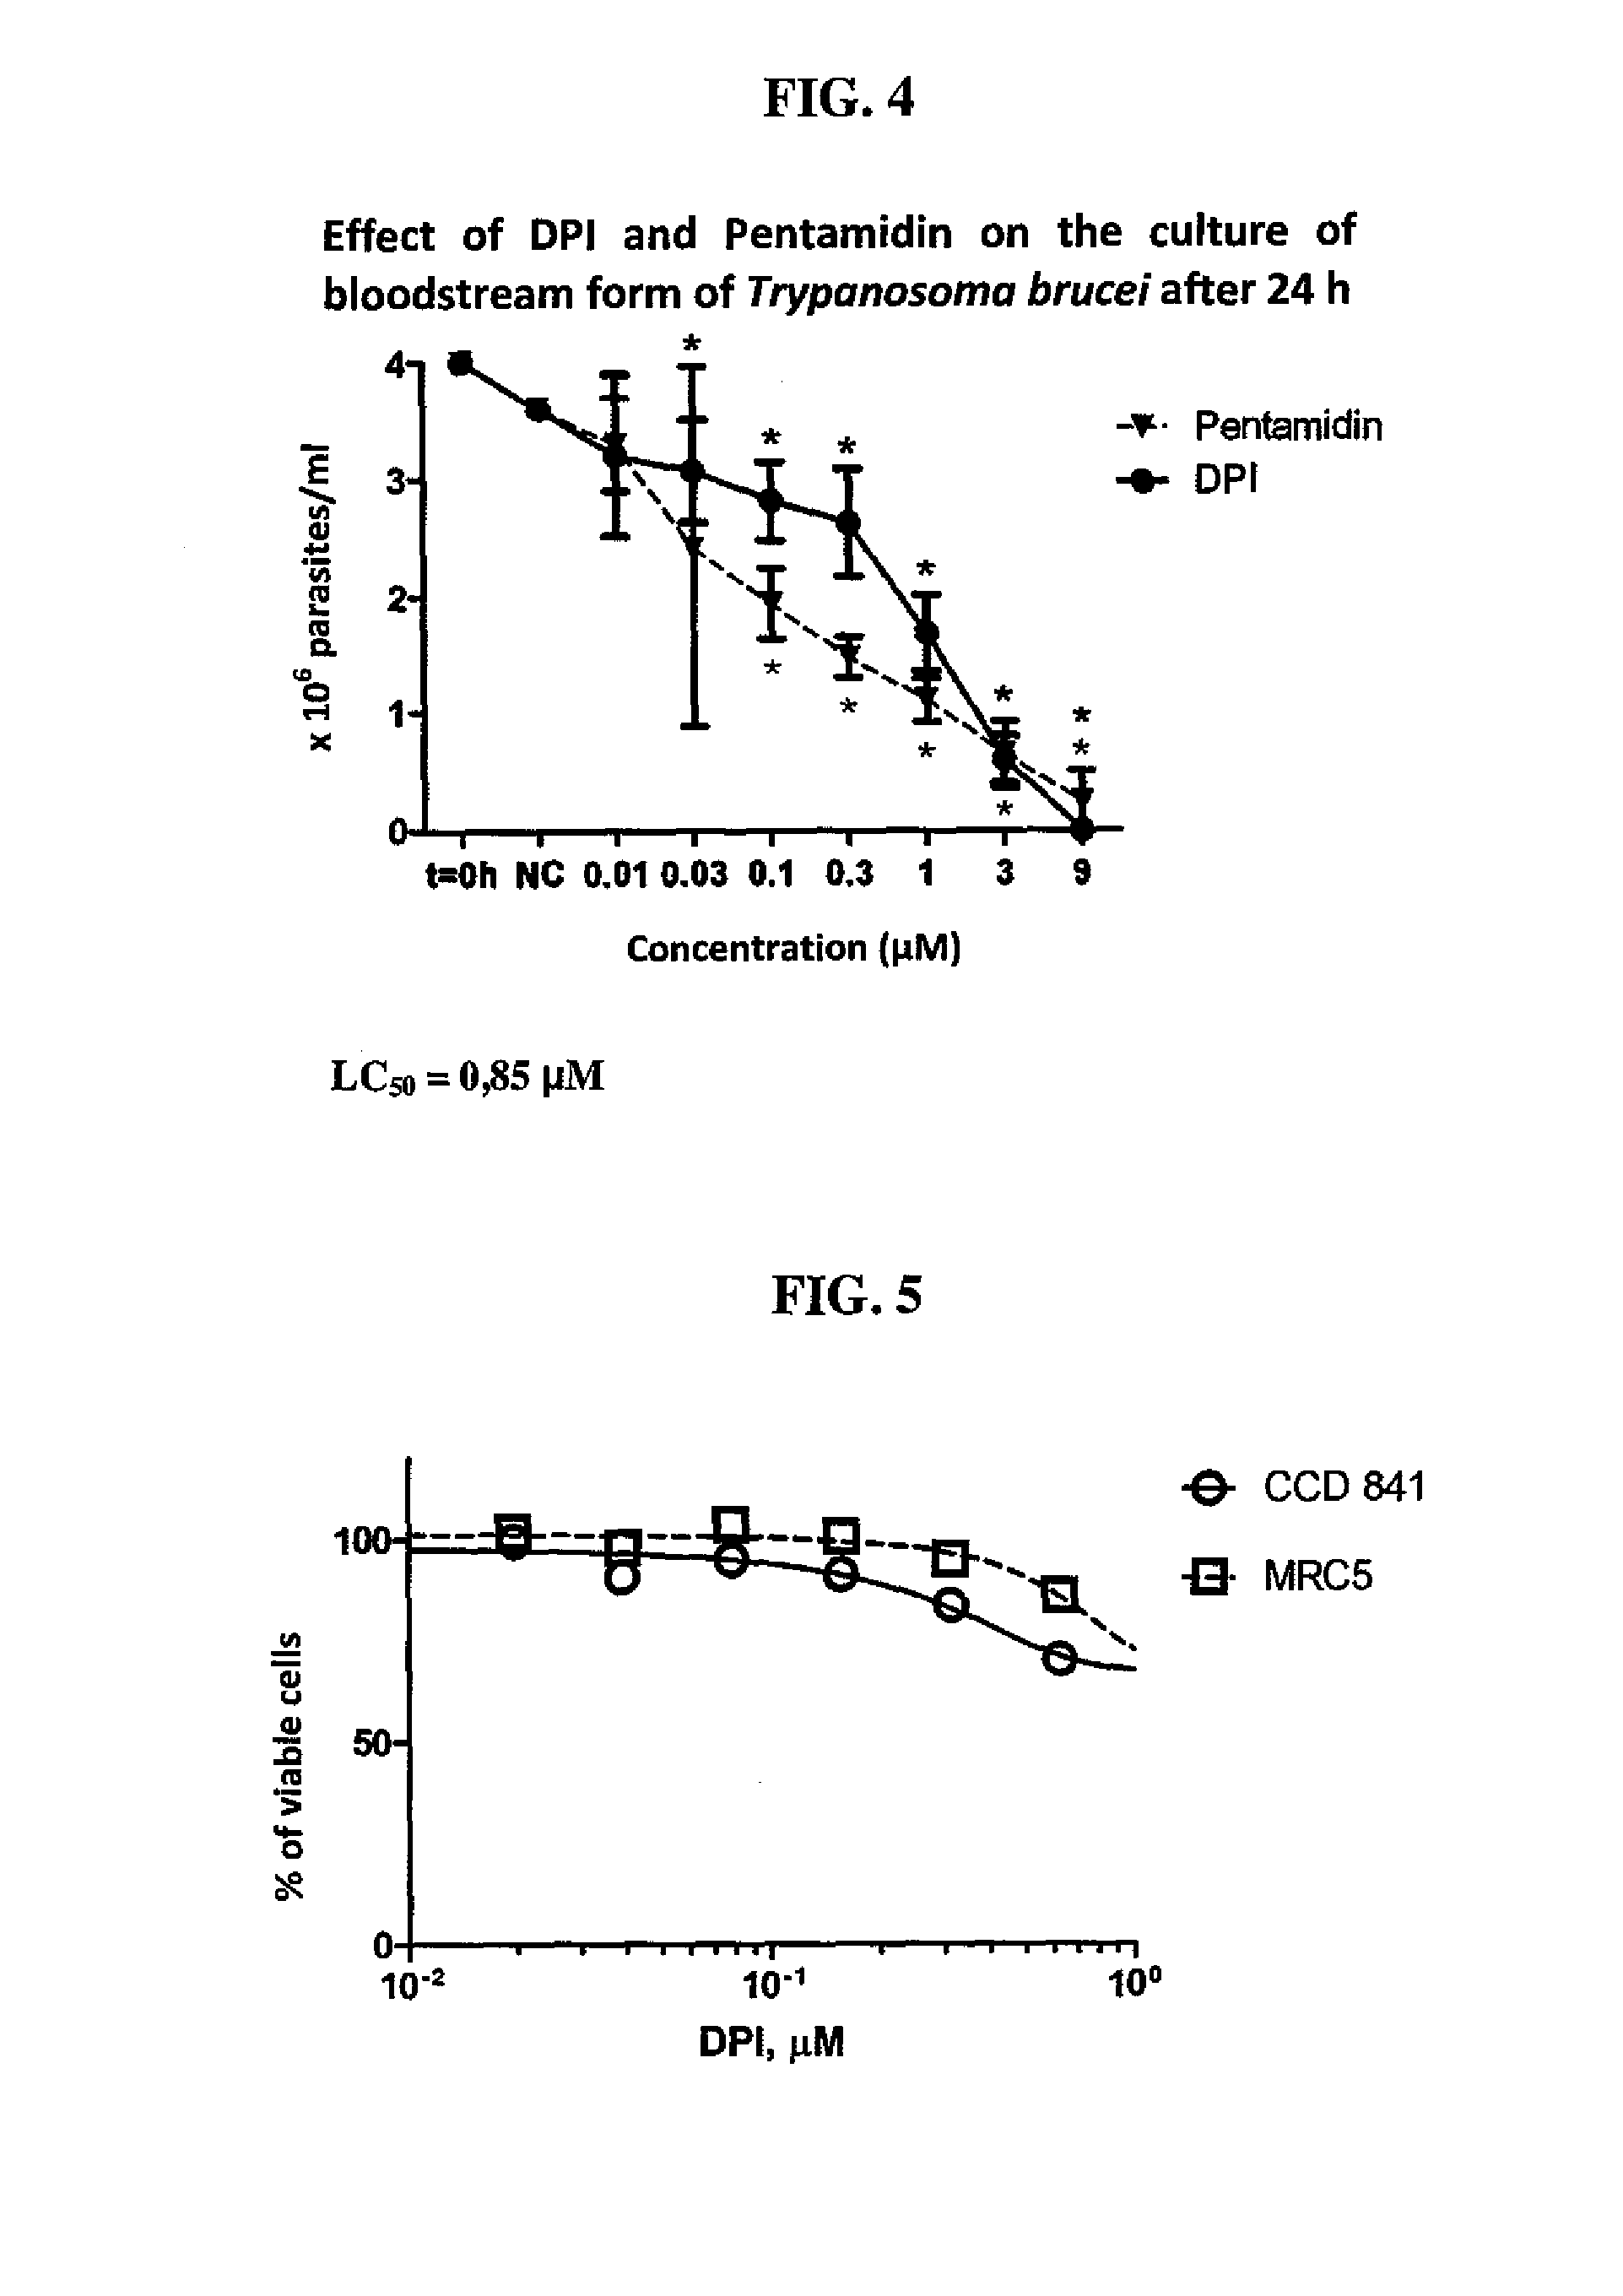 Pharmaceutical composition comprising diphenyleneiodonium for treating diseases caused by the parasites belonging to the family trypanosomatidae